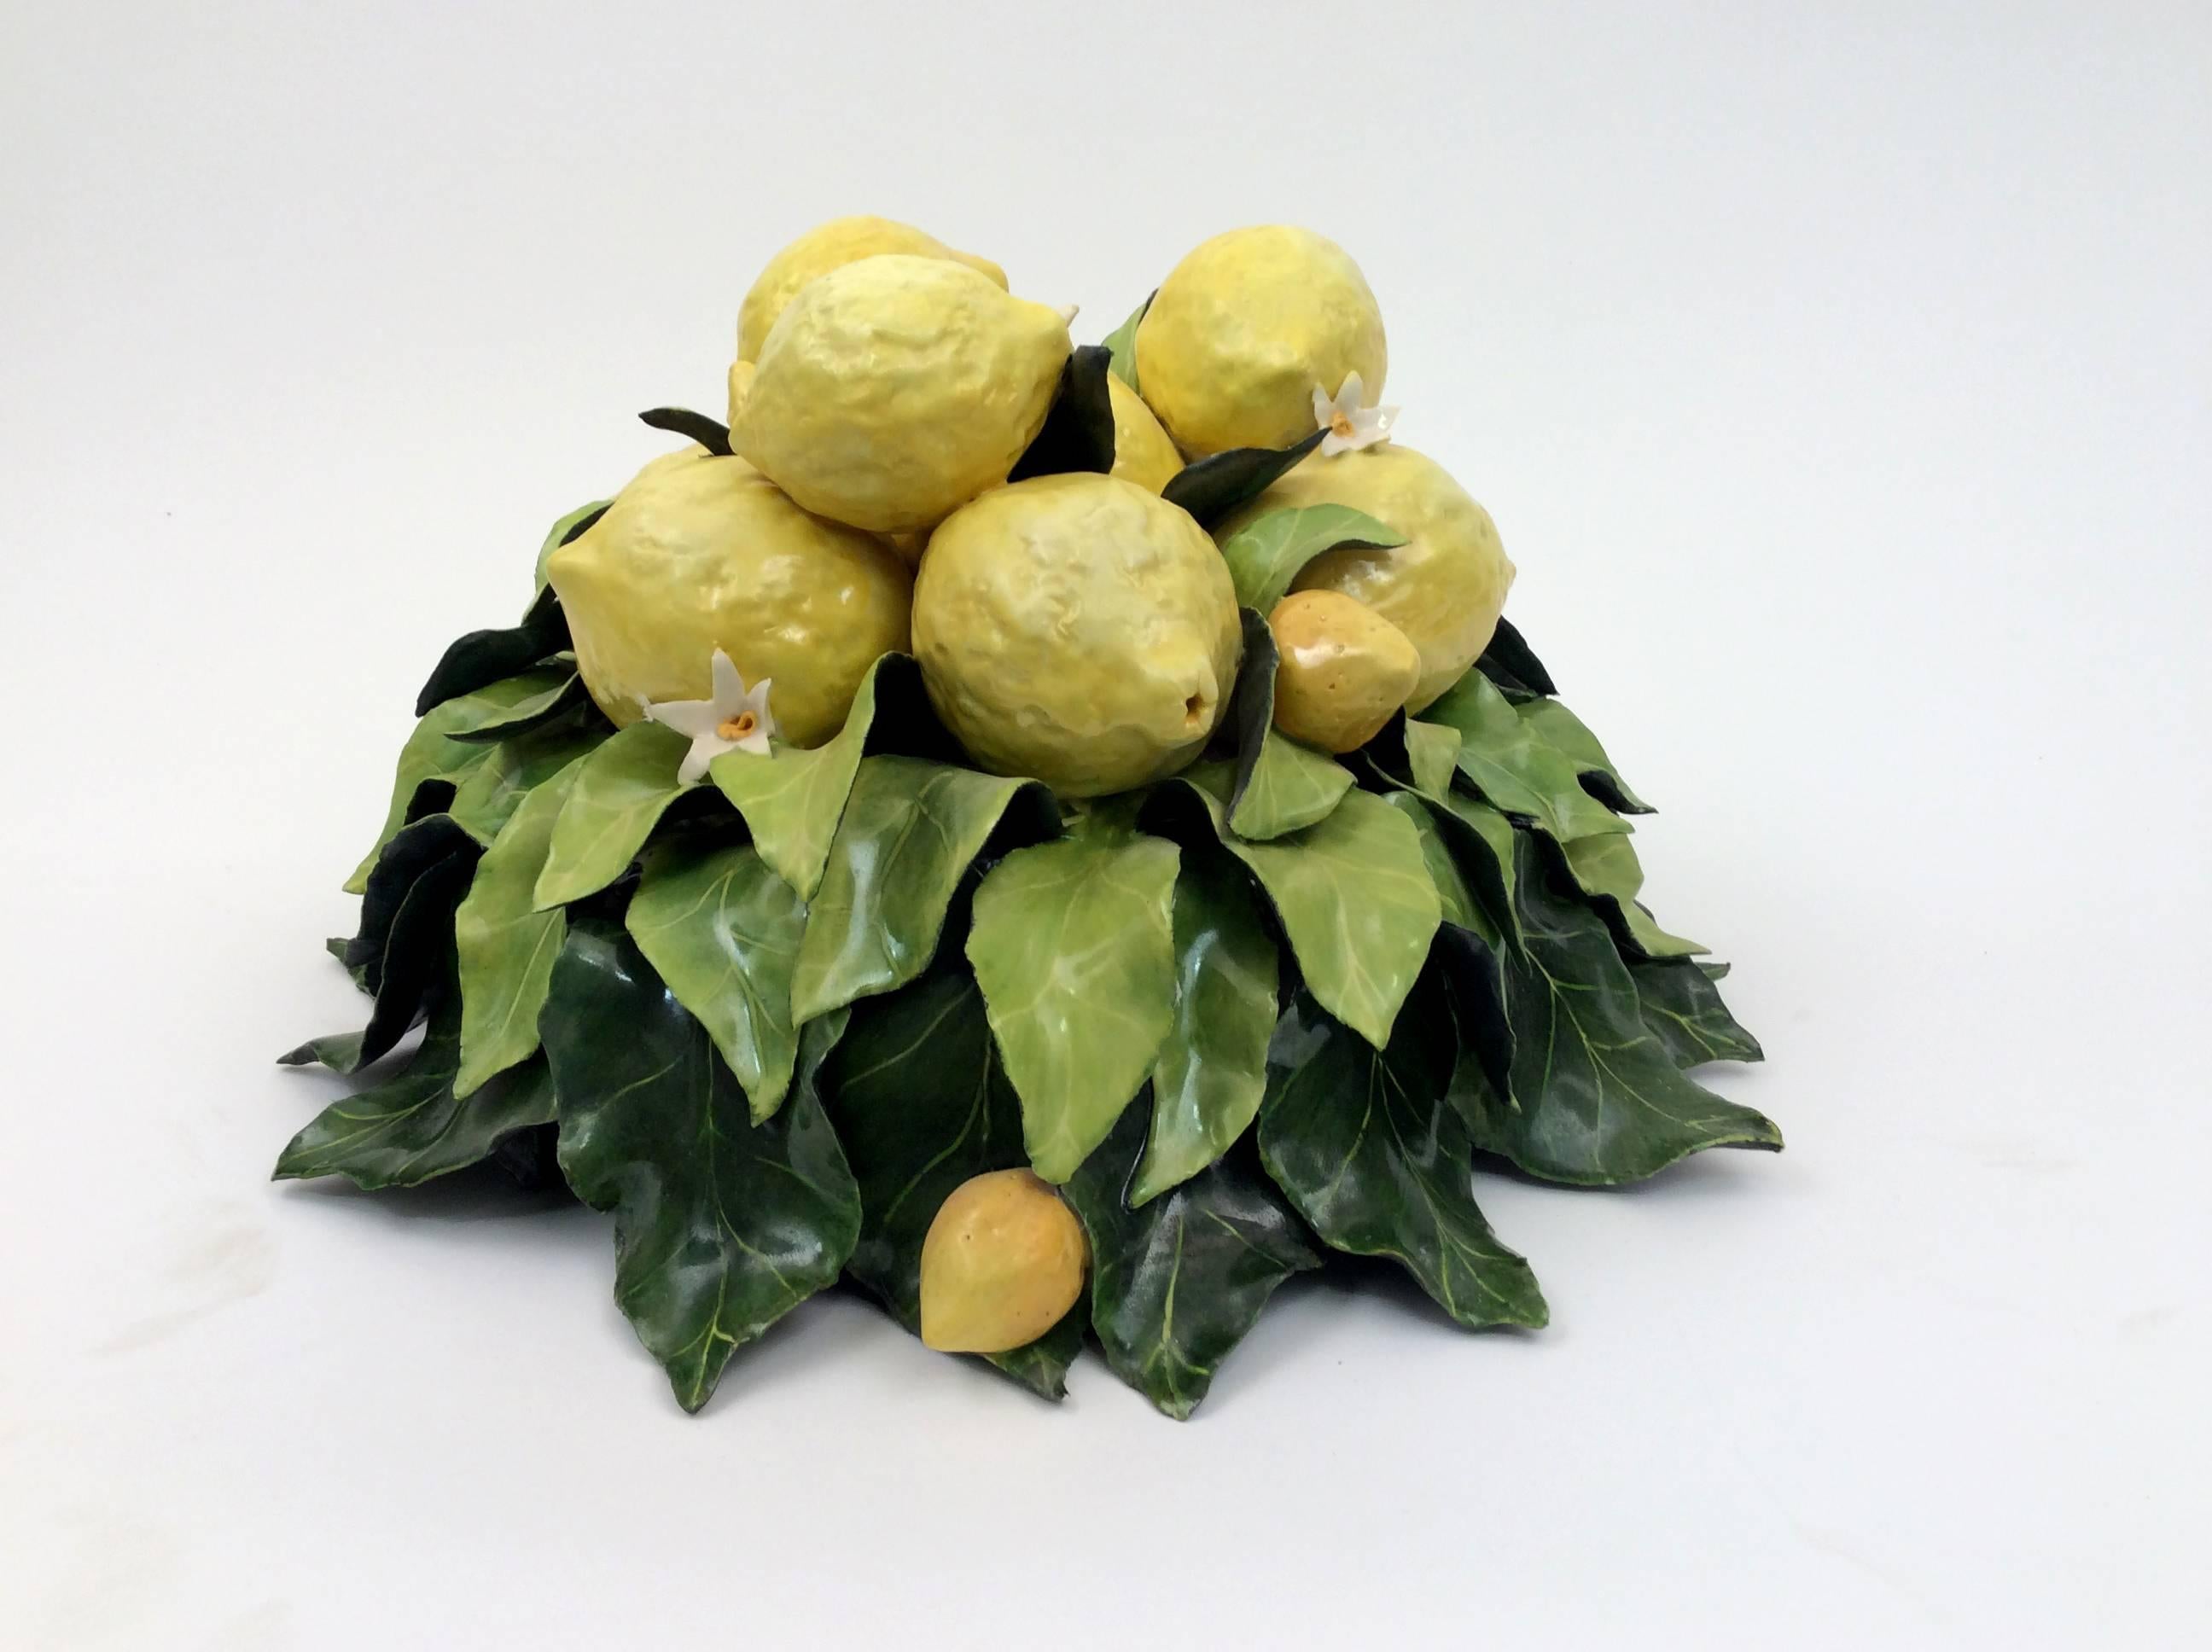 A raised bowl of leaves cradling a collection of lemons, embellished with kumquats and blossoms. this is a one of a kind handcrafted piece. 
Katherine Houston is a living artist working in an 18th century technique, adapting the techniques and